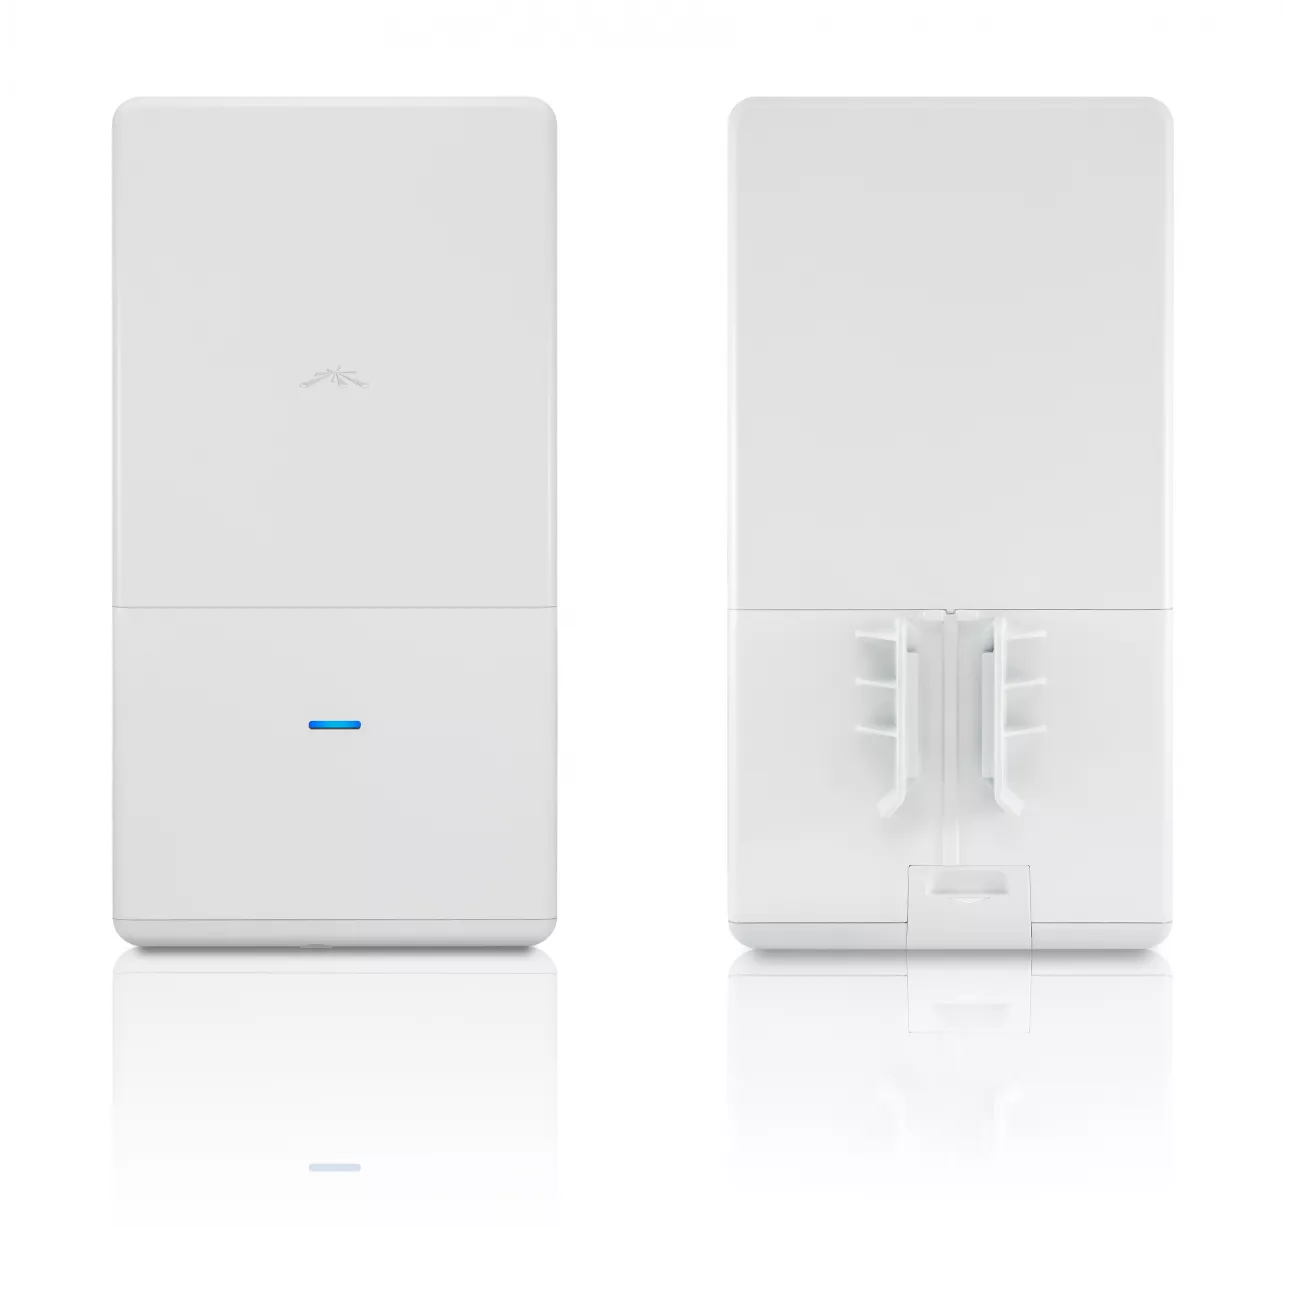 Toчка доступа UniFi Outdoor AC 2.4 GHz, 5 GHz